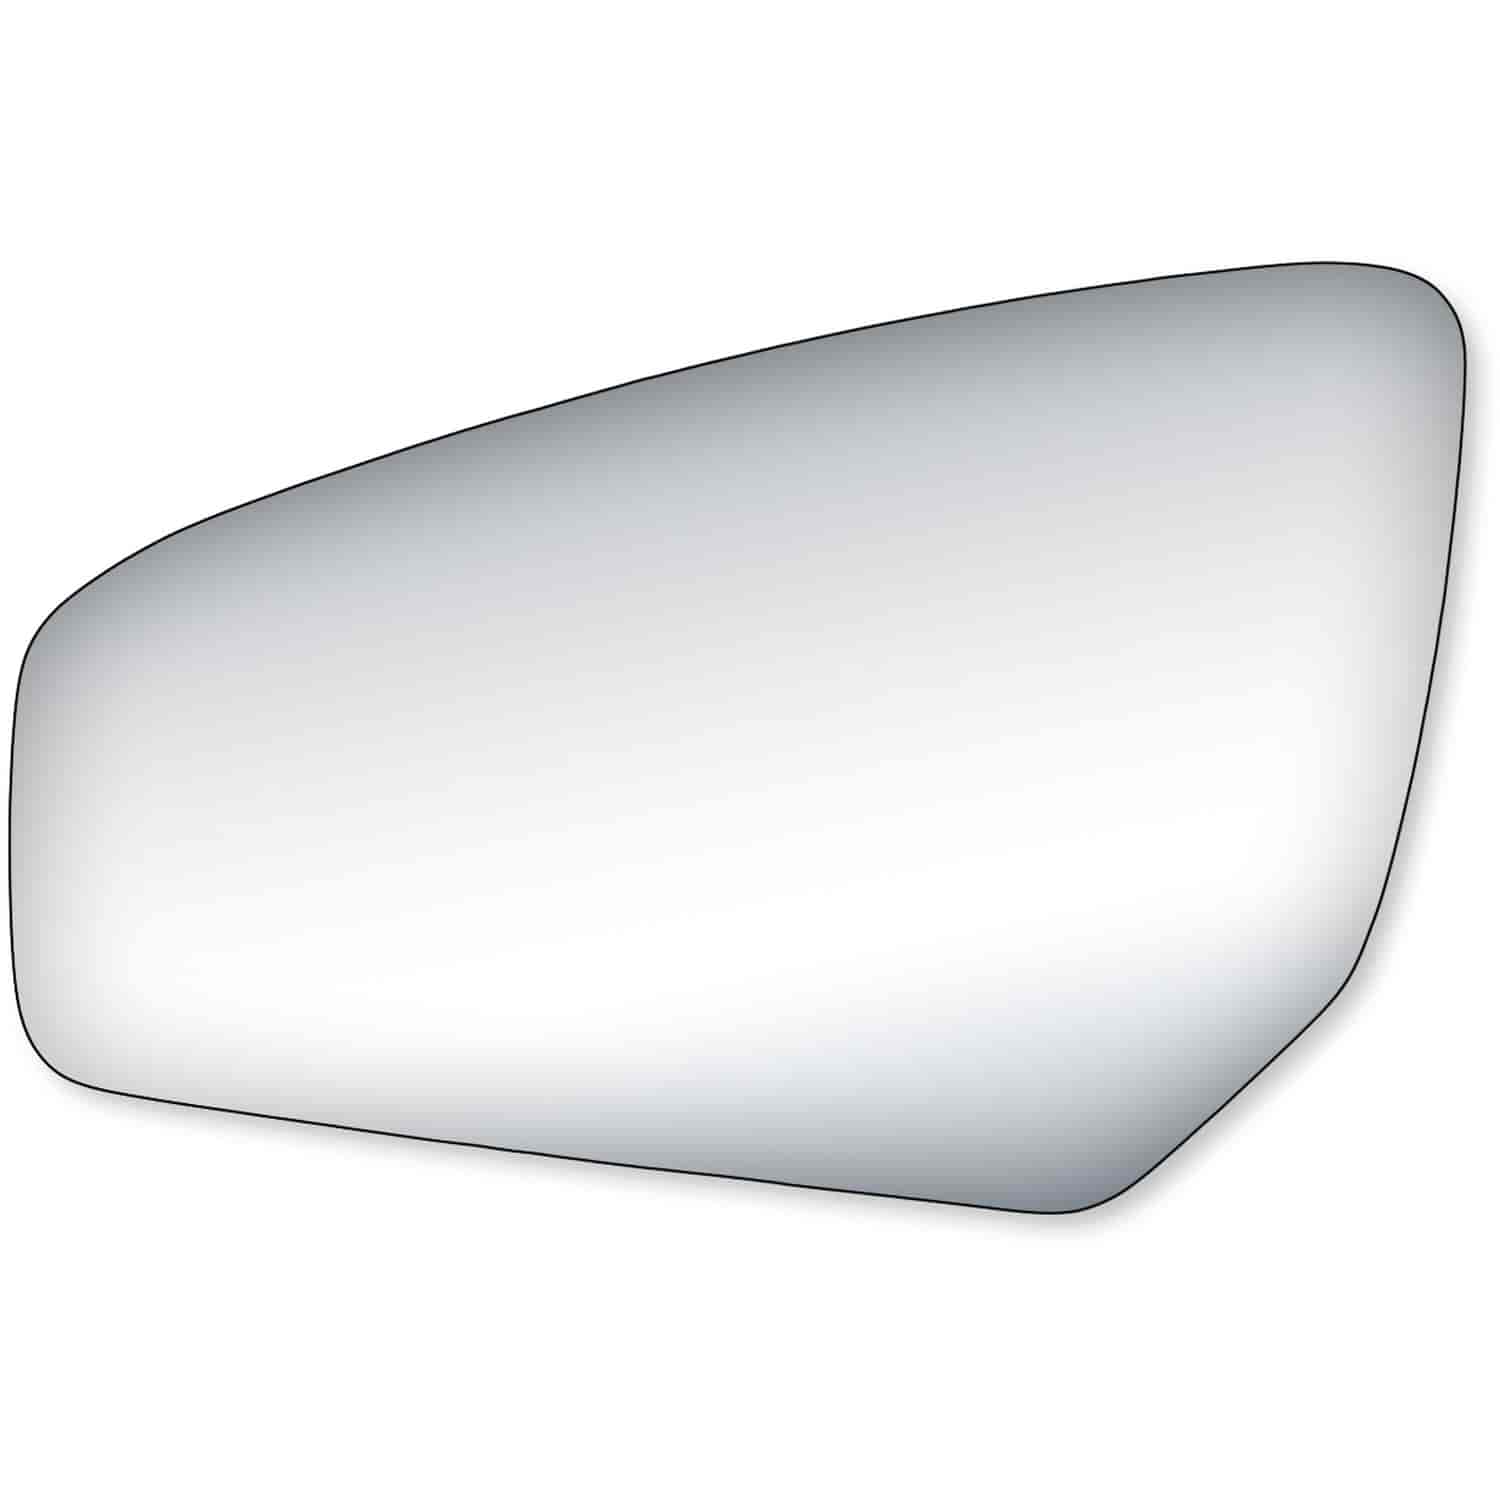 Replacement Glass for 07-12 Sentra the glass measures 4 1/8 tall by 6 3/4 wide and 7 13/16 diagonall